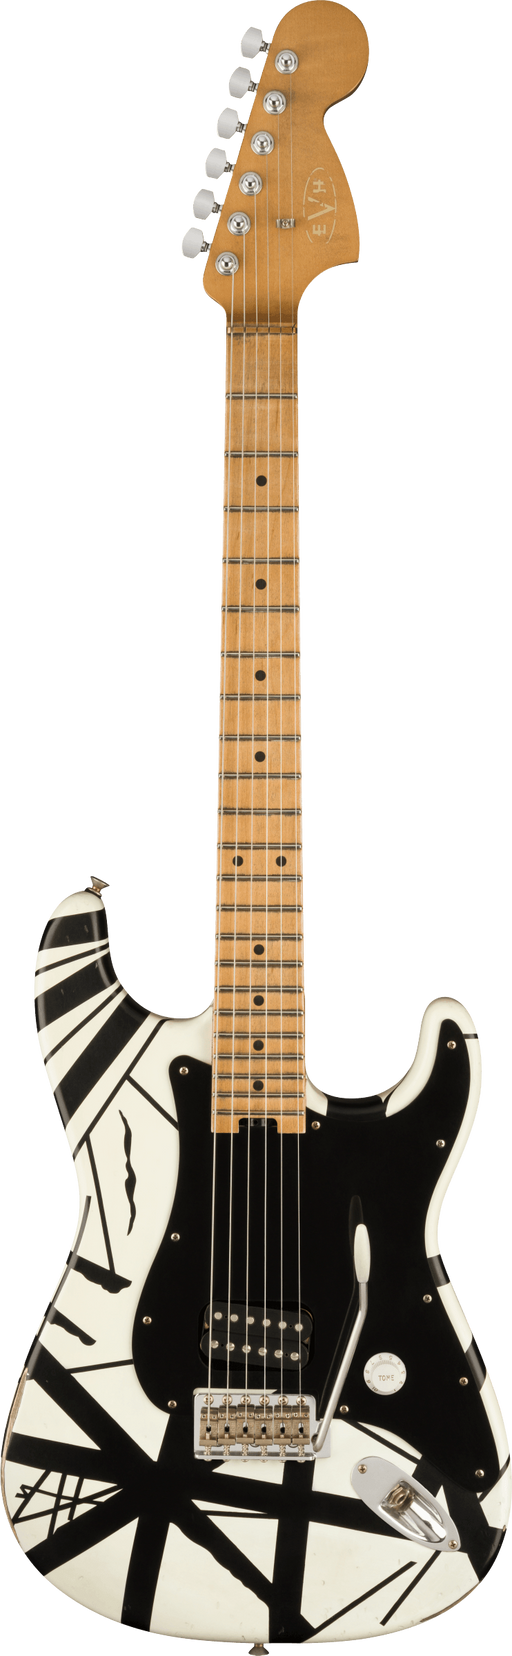 EVH Striped Series '78 Eruption MN, White With Black Stripes Relic - Fair Deal Music